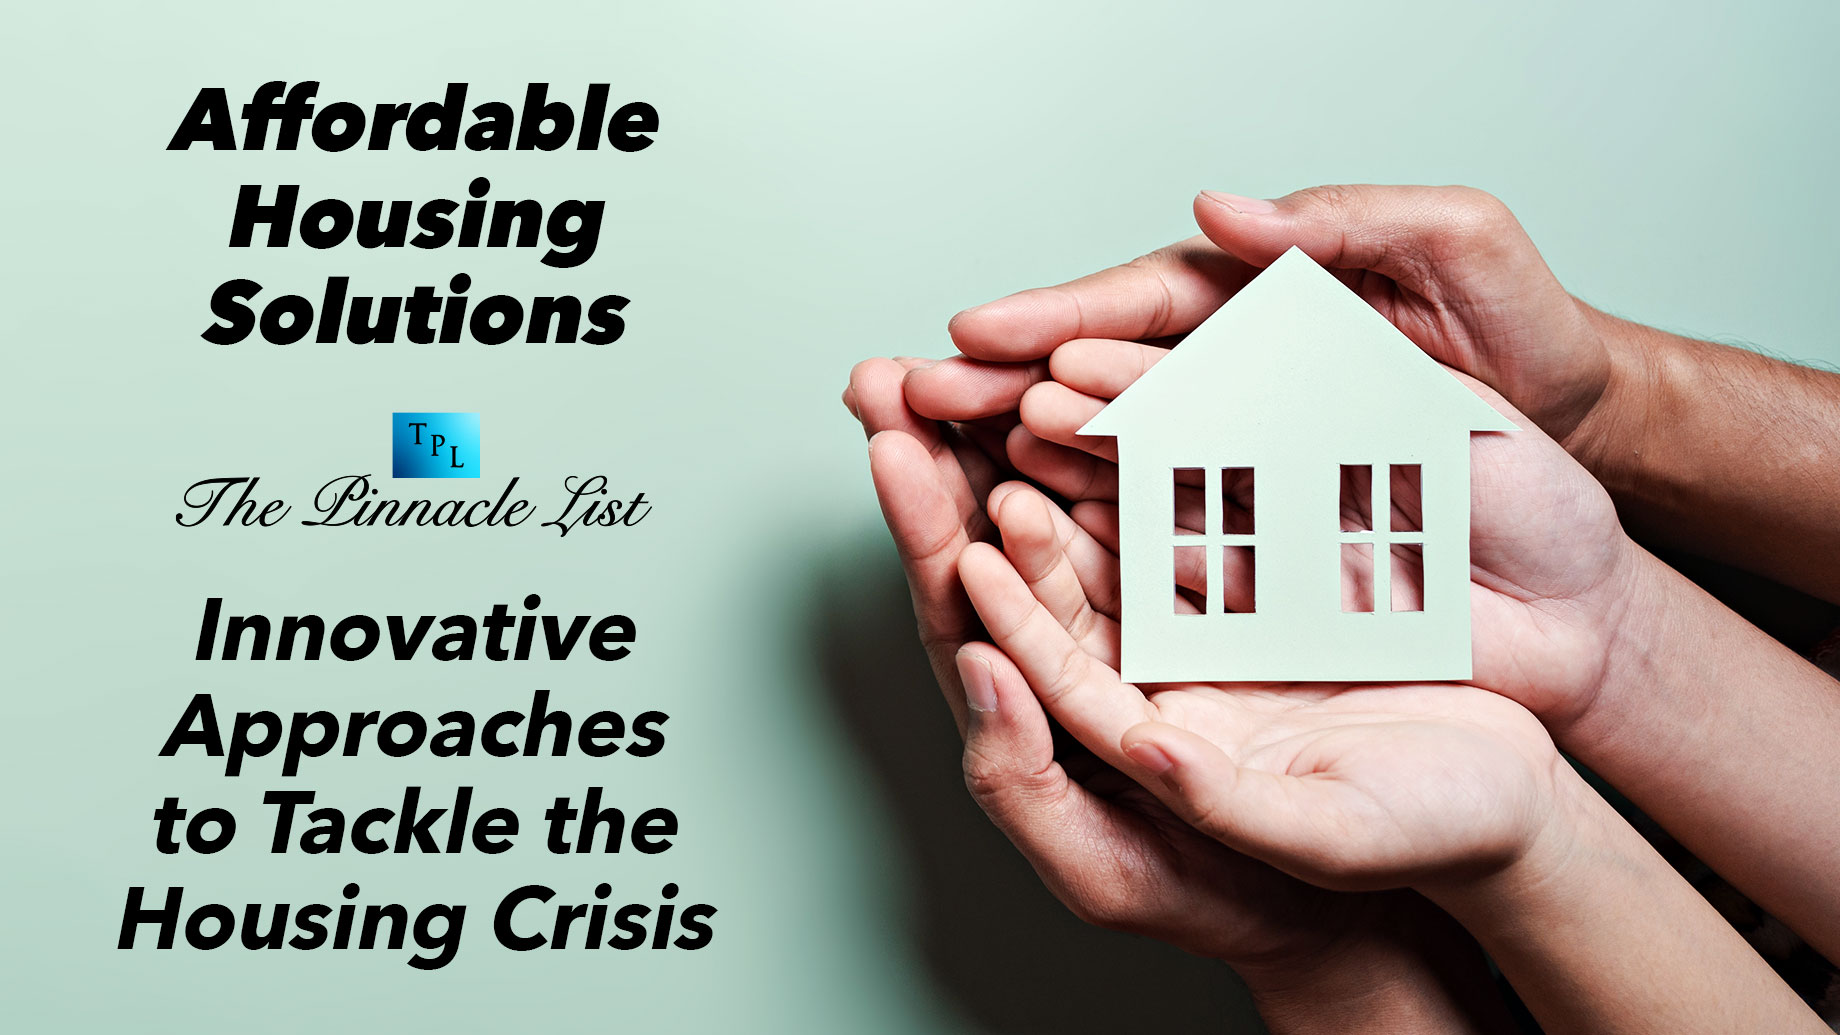 Affordable Housing Solutions: Innovative Approaches to Tackle the Housing Crisis